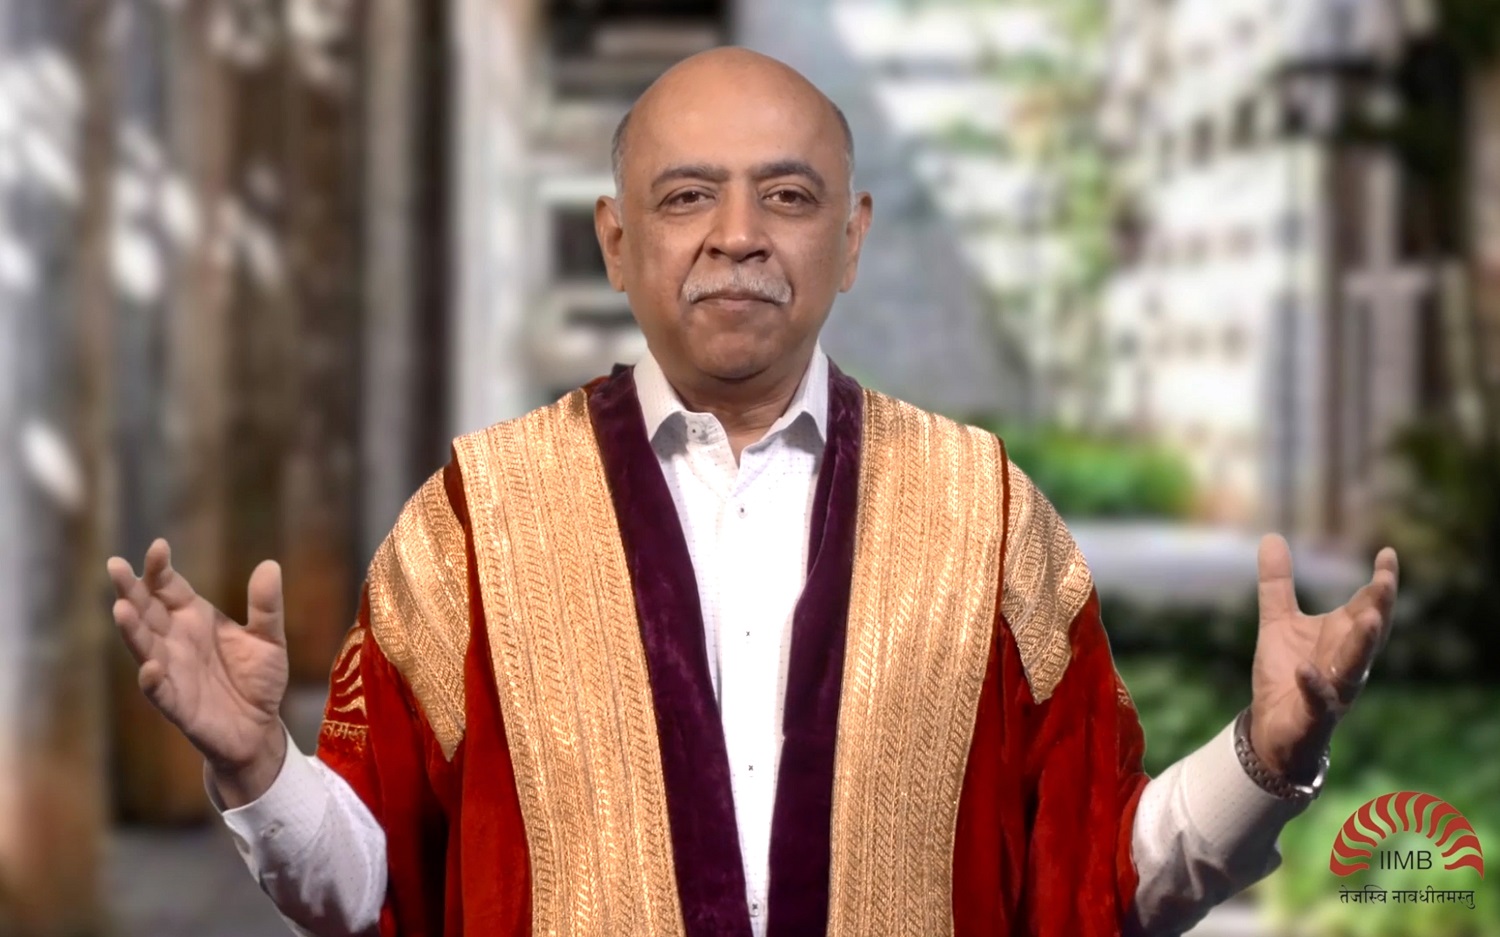 Dr. Arvind Krishna, Chairman and Chief Executive Officer, IBM, delivers the Convocation address at the 46th Convocation of IIMB, on April 16th, 2021.